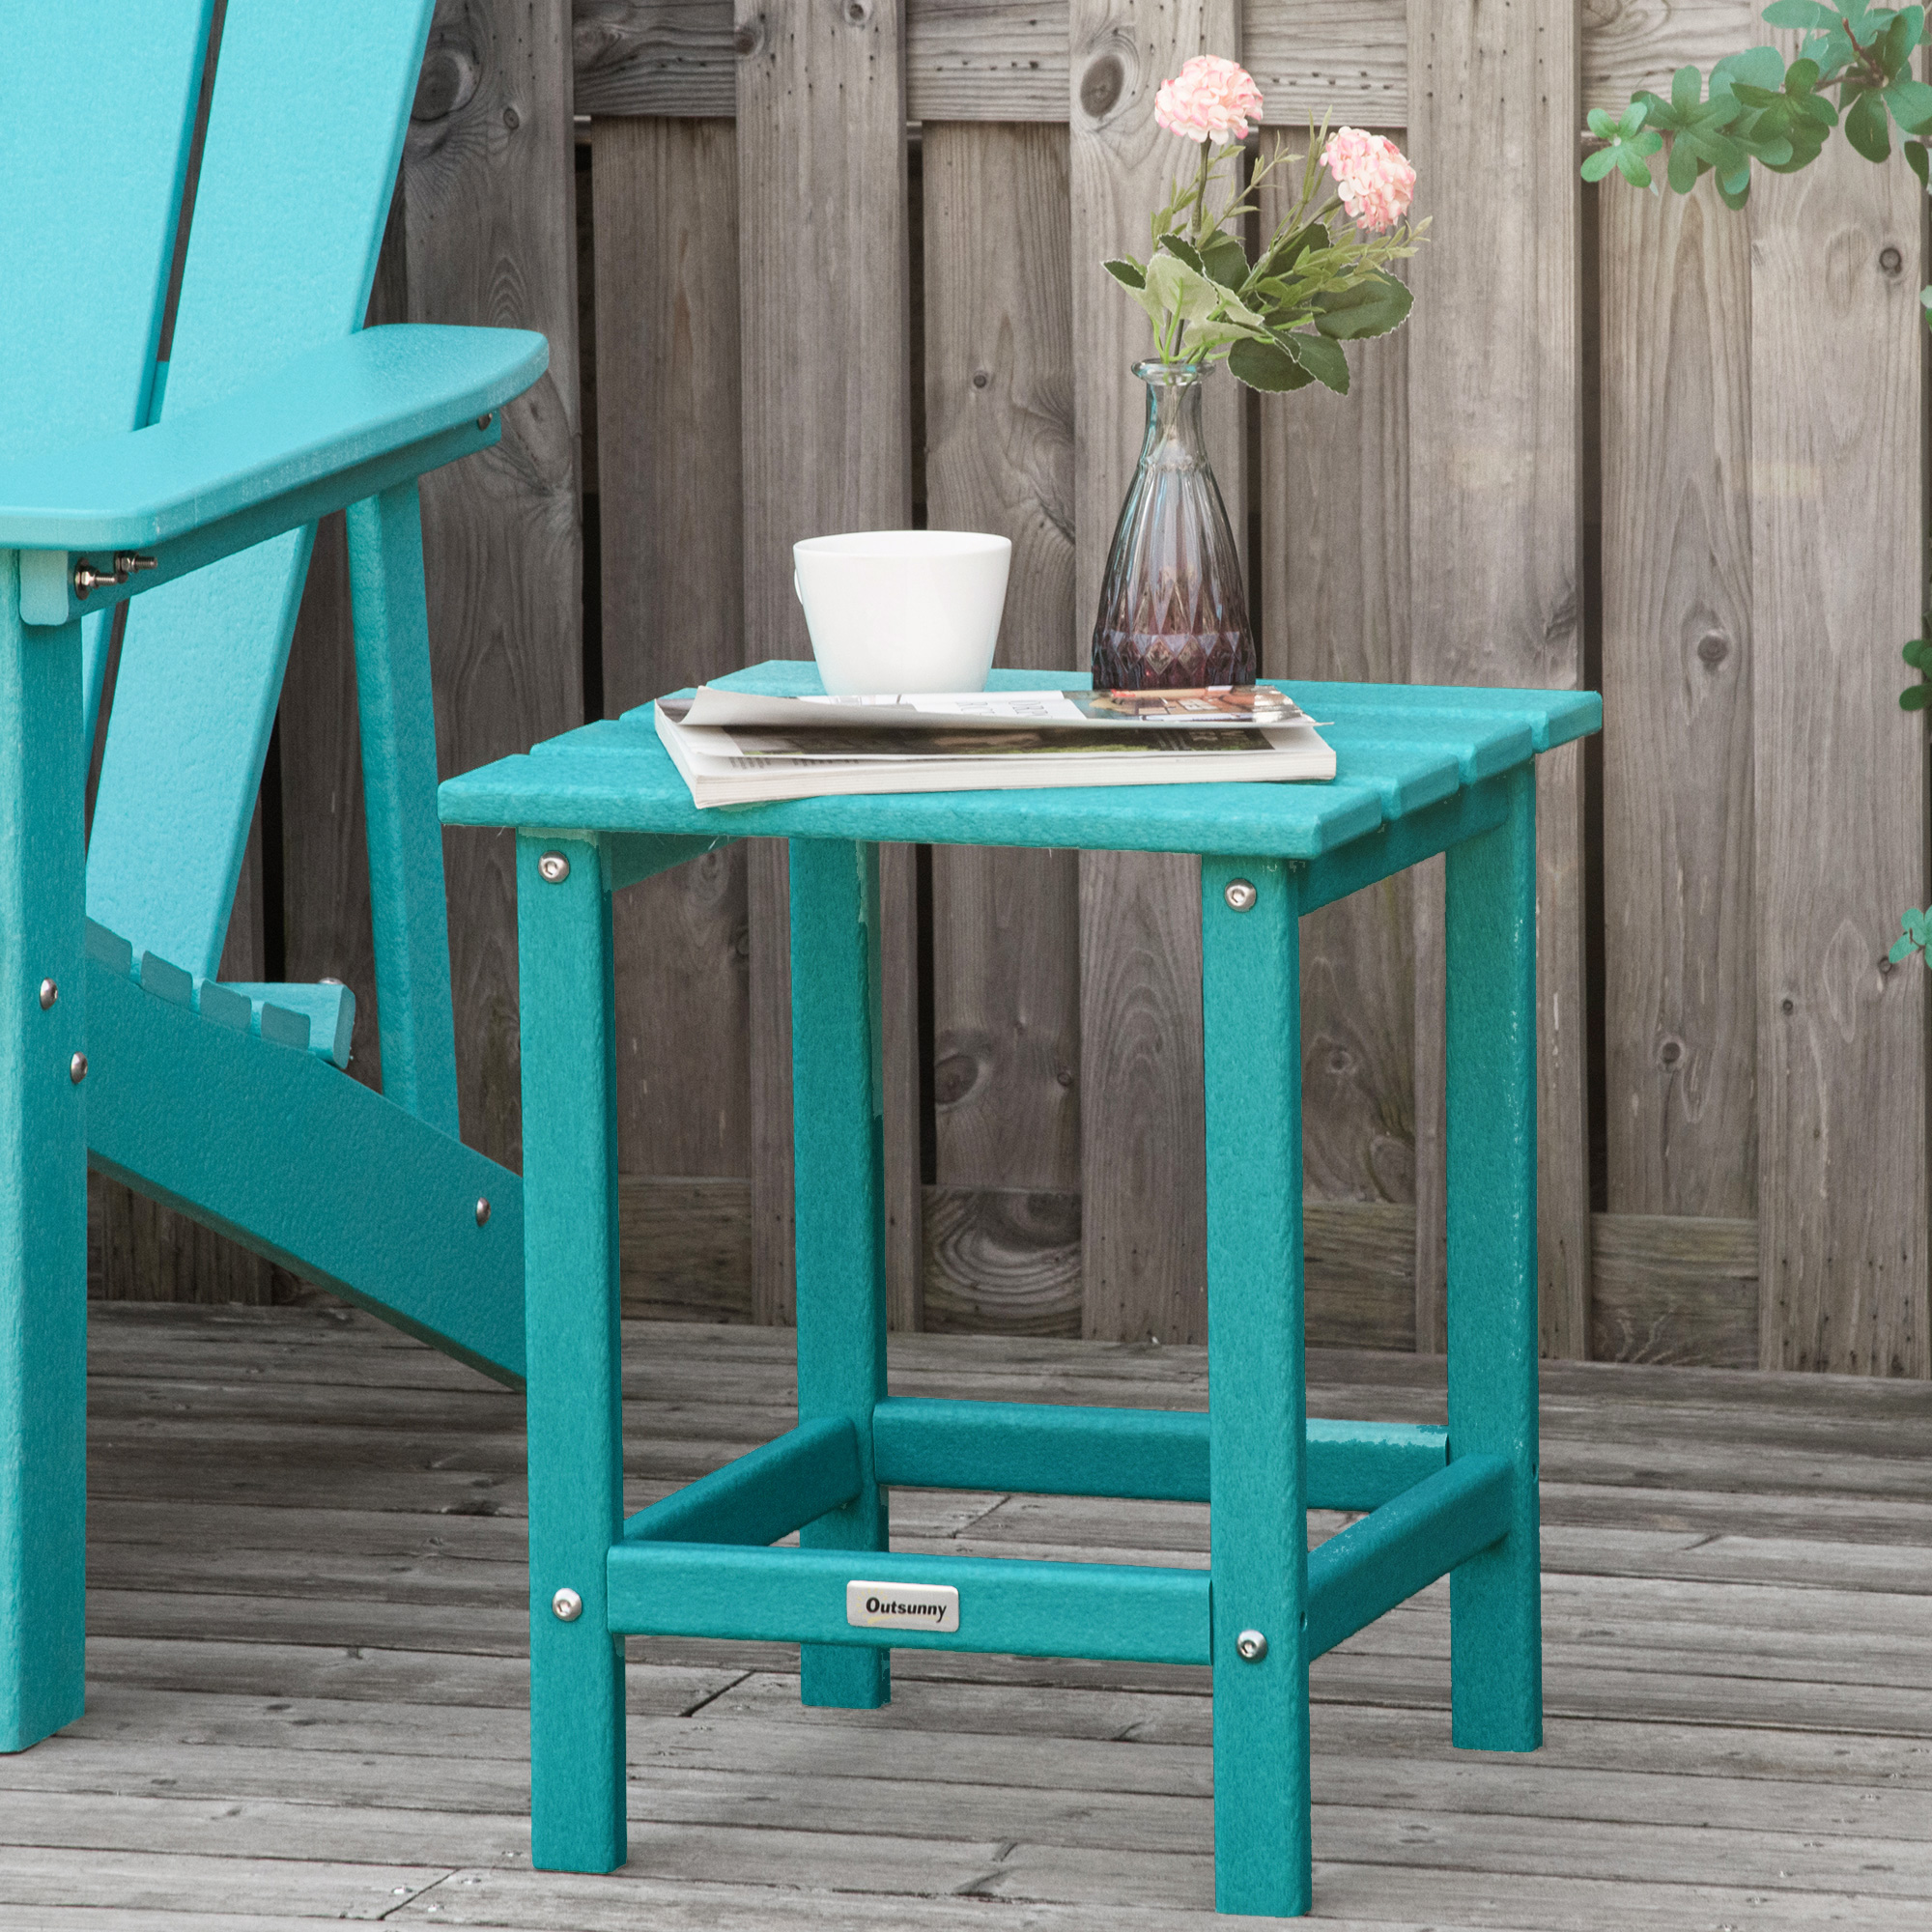 Outsunny 15" Patio End Table, HDPE Plastic, Turquoise - image 2 of 9